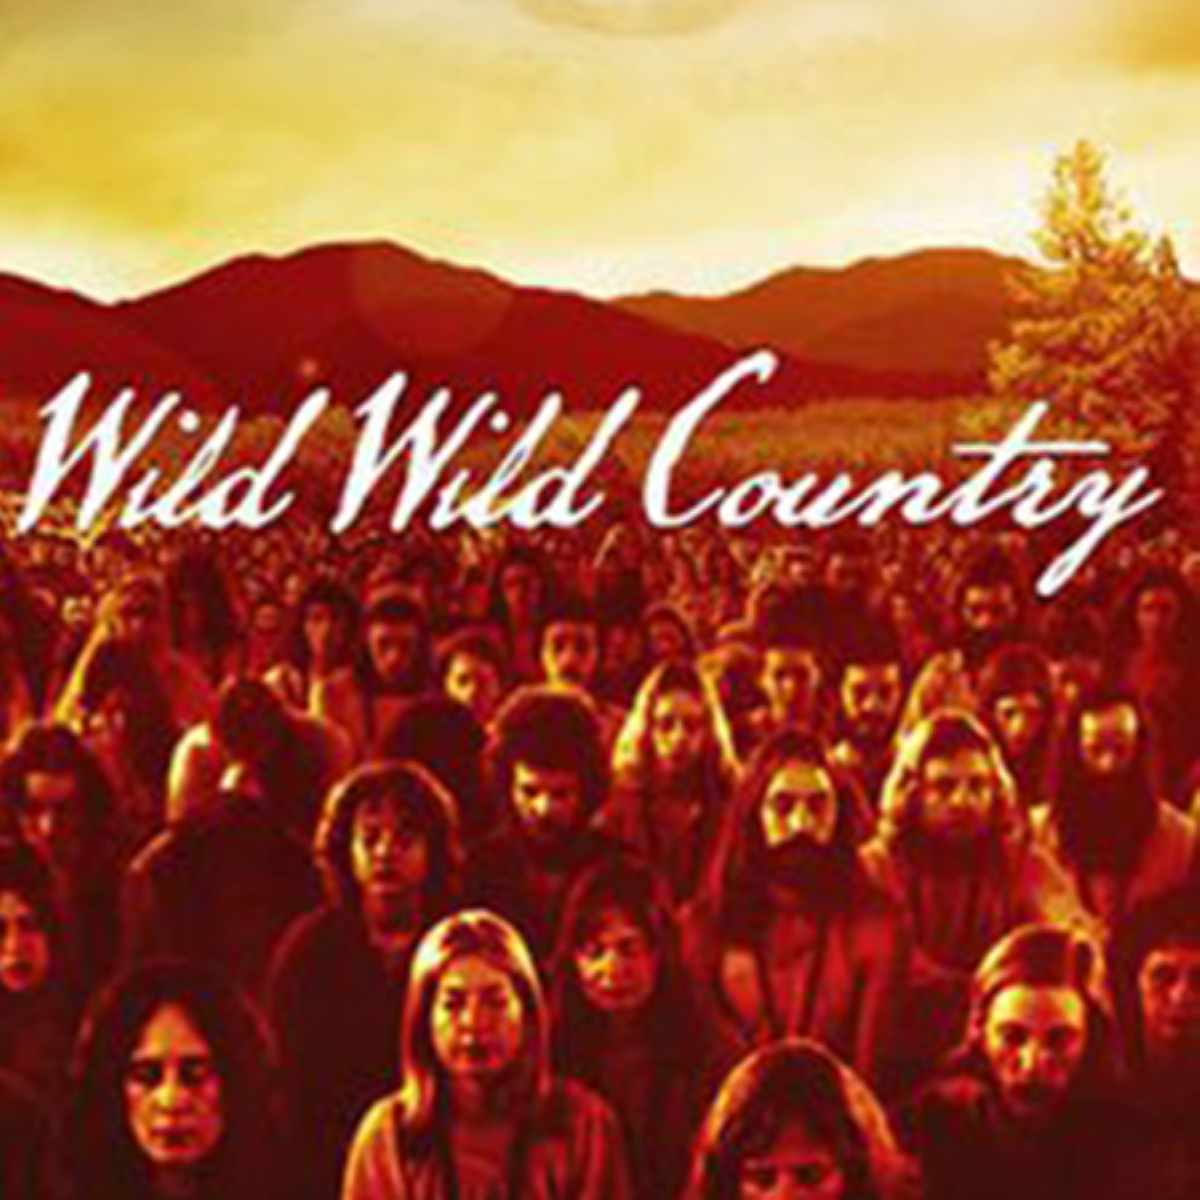 [Rattan Gujadhur] Wild Wild Country – Review from a Buddhist’s Perspective